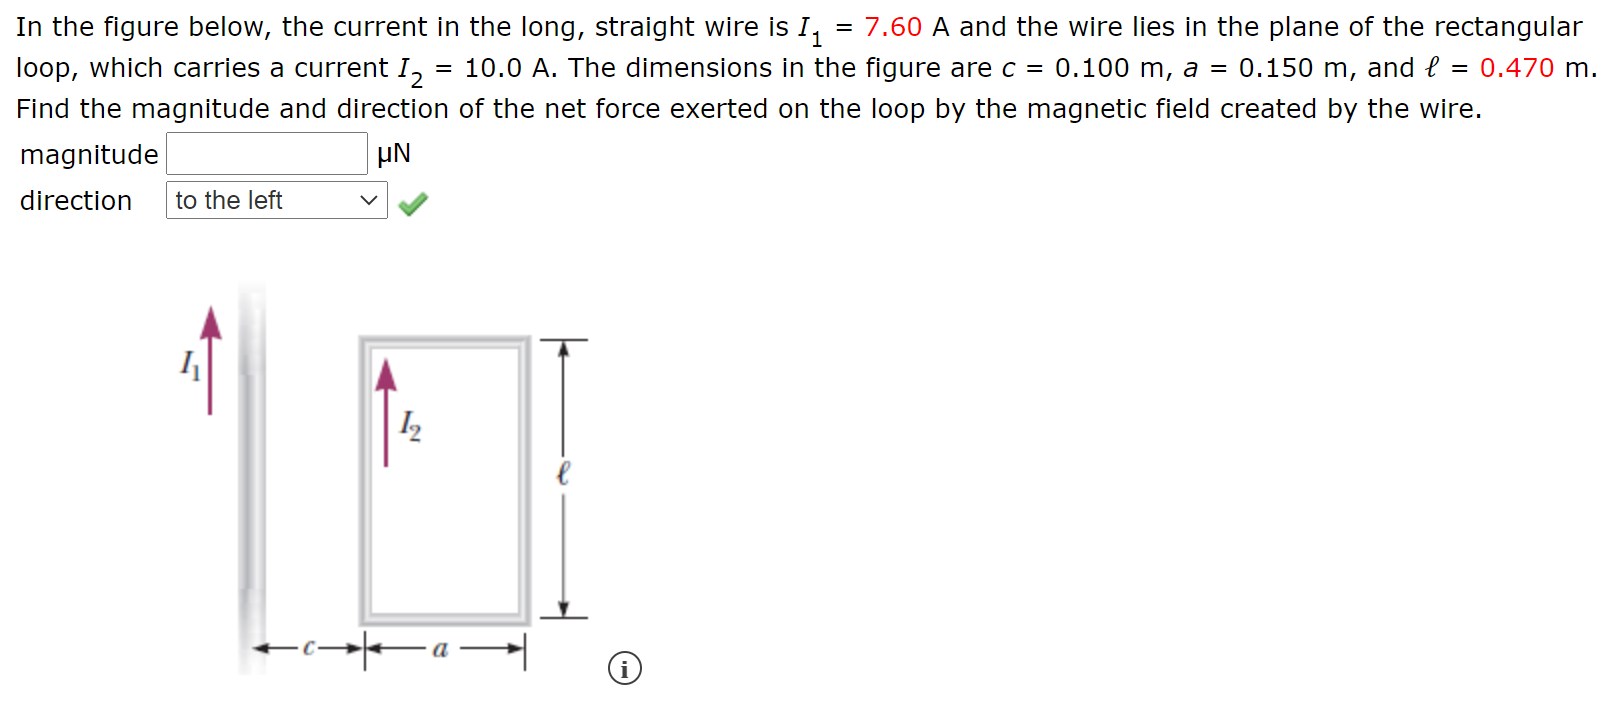 In the figure below, the current in the long, straight wire is I,
= 7.60 A and the wire lies in the plane of the rectangular
loop, which carries a current I,
10.0 A. The dimensions in the figure are c =
0.100 m, a
0.150 m, and e = 0.470 m.
Find the magnitude and direction of the net force exerted on the loop by the magnetic field created by the wire.
magnitude
HN
direction
to the left
